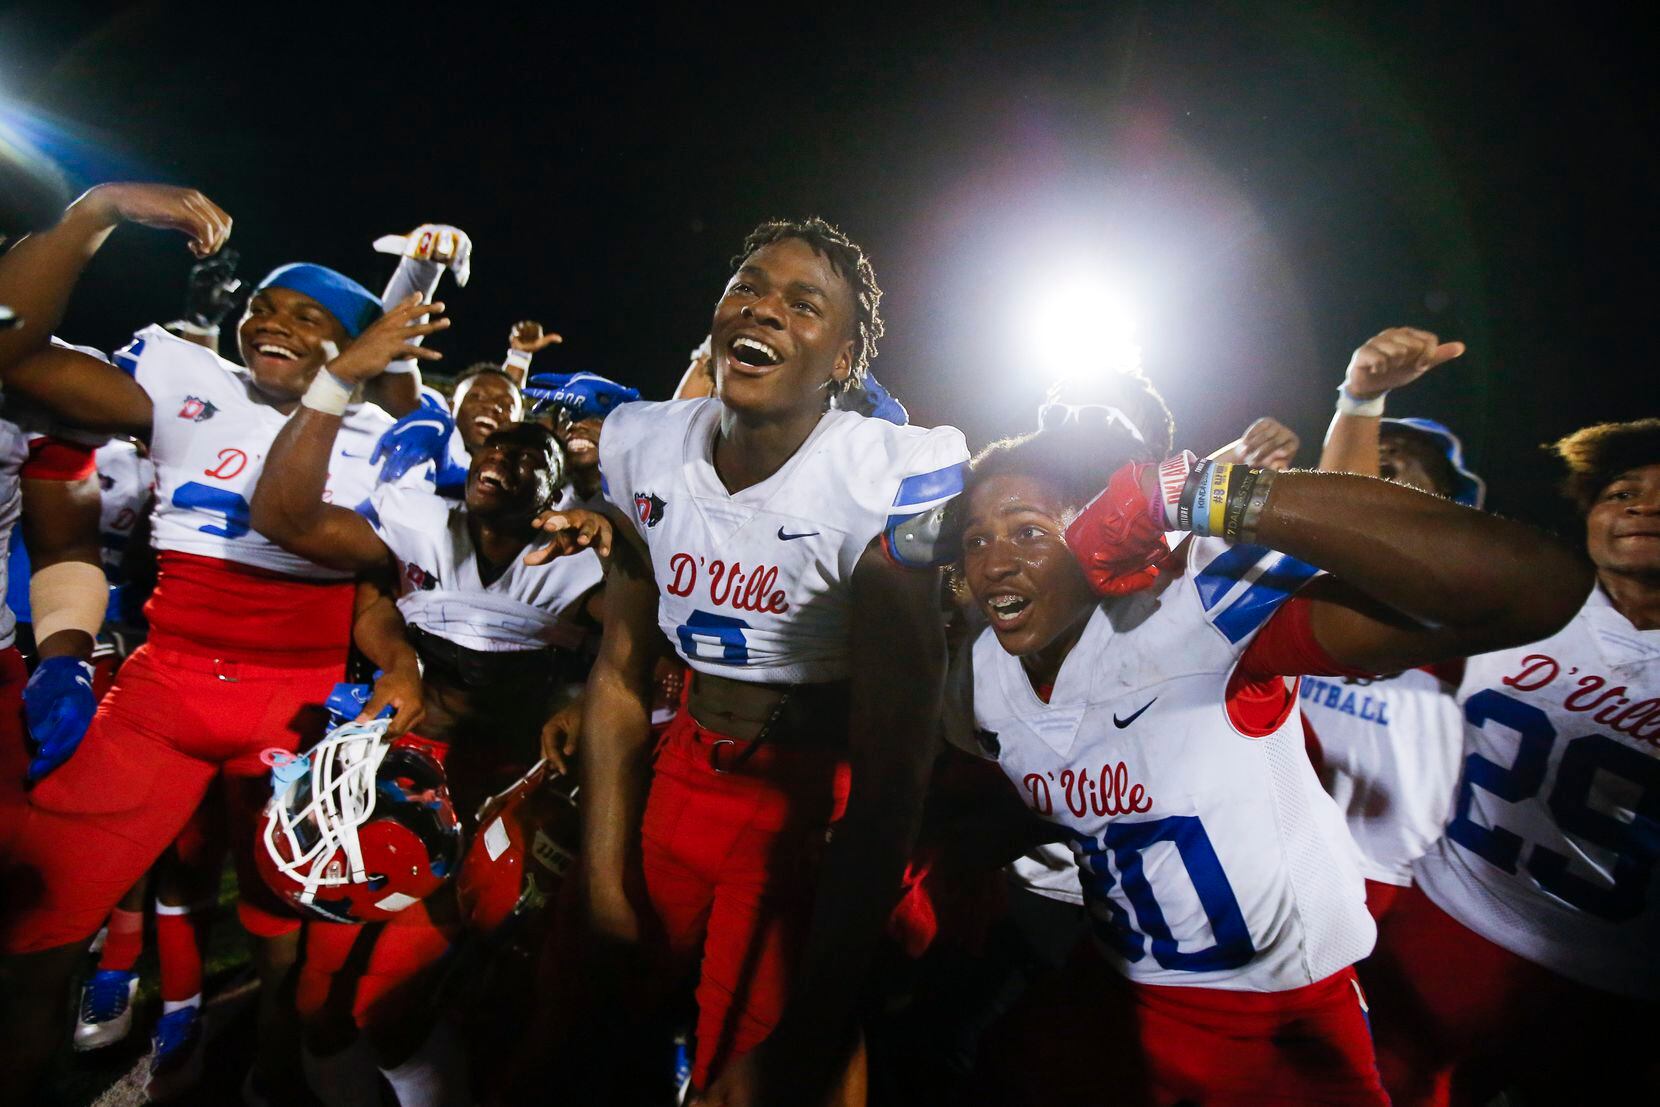 Duncanville coach Reginald Samples has turned Duncanville into a perennial state power. Can...